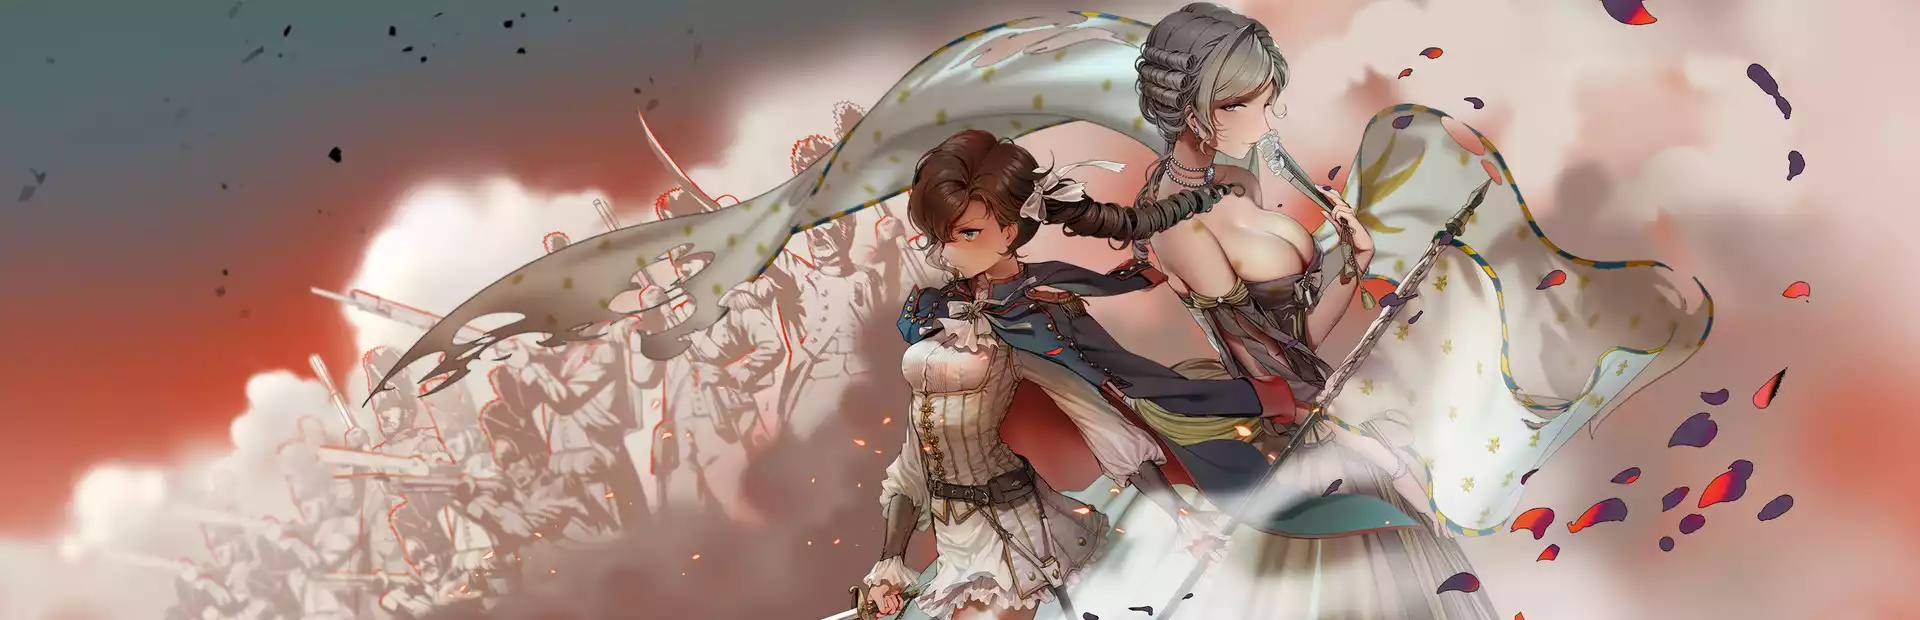 Banner of the Maid Steam Key China